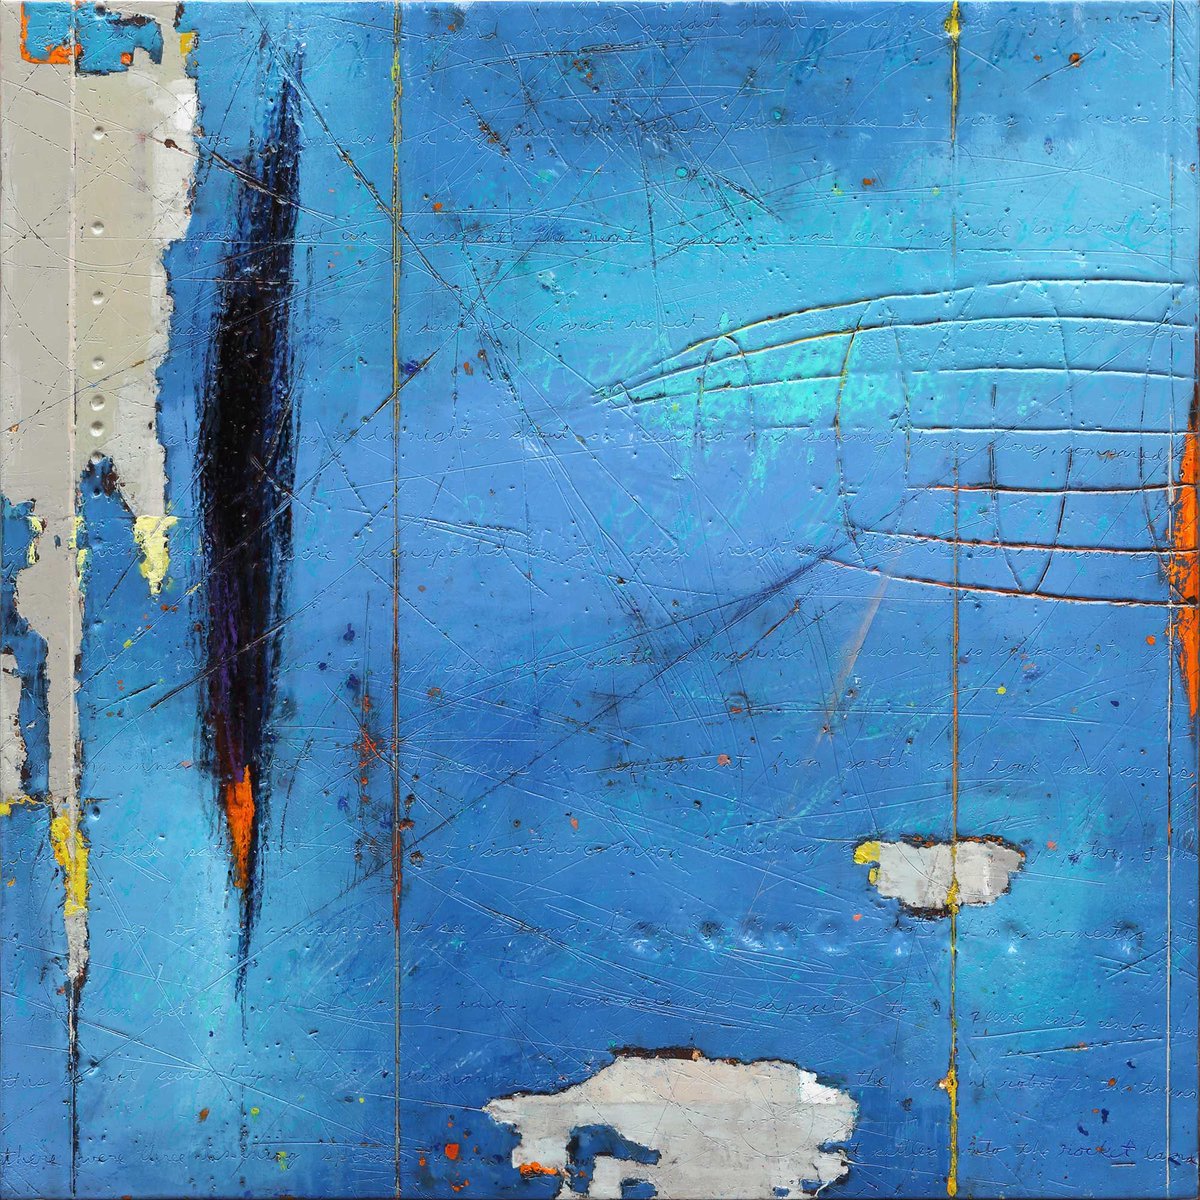 Kevin Ghiglione,      Aérienne Blue ,     mixed media encaustic,    36' x 36'
.
.
.
#canadianart #contemporary #encaustic #painting #fineart #torontoartgallery #collector #abstract #writing #story #canadianartist #abstract #wax # #artcollector #graphic #information #time